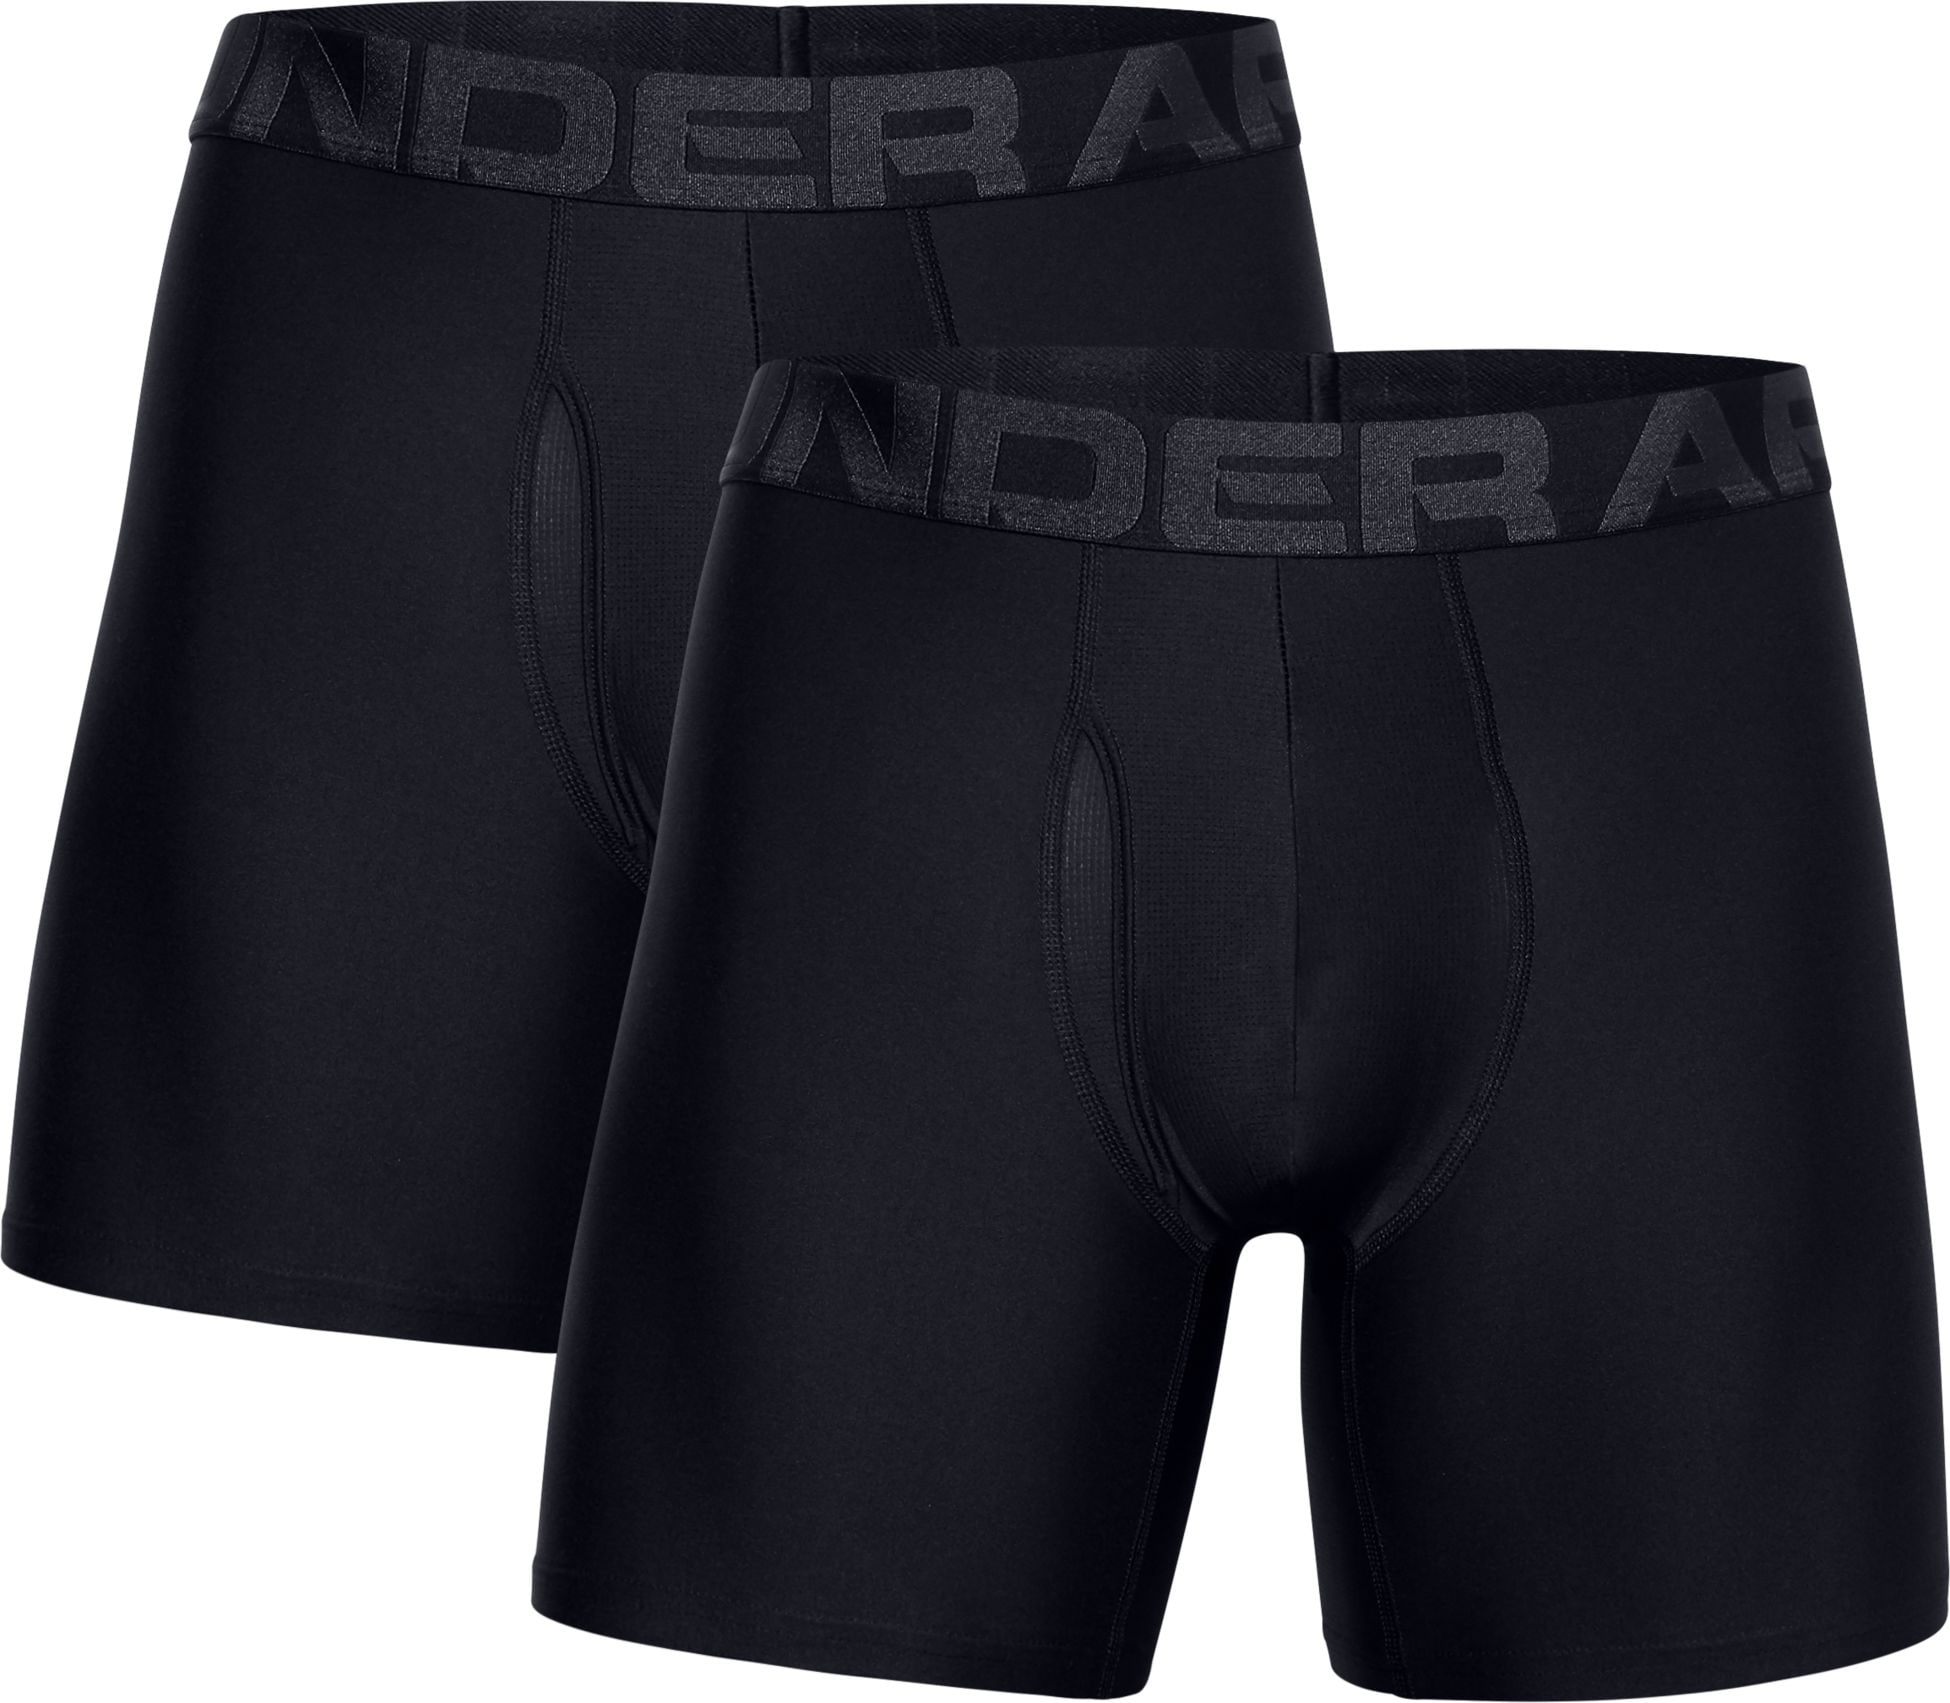 UNDER ARMOUR, M TECH 6IN 2P